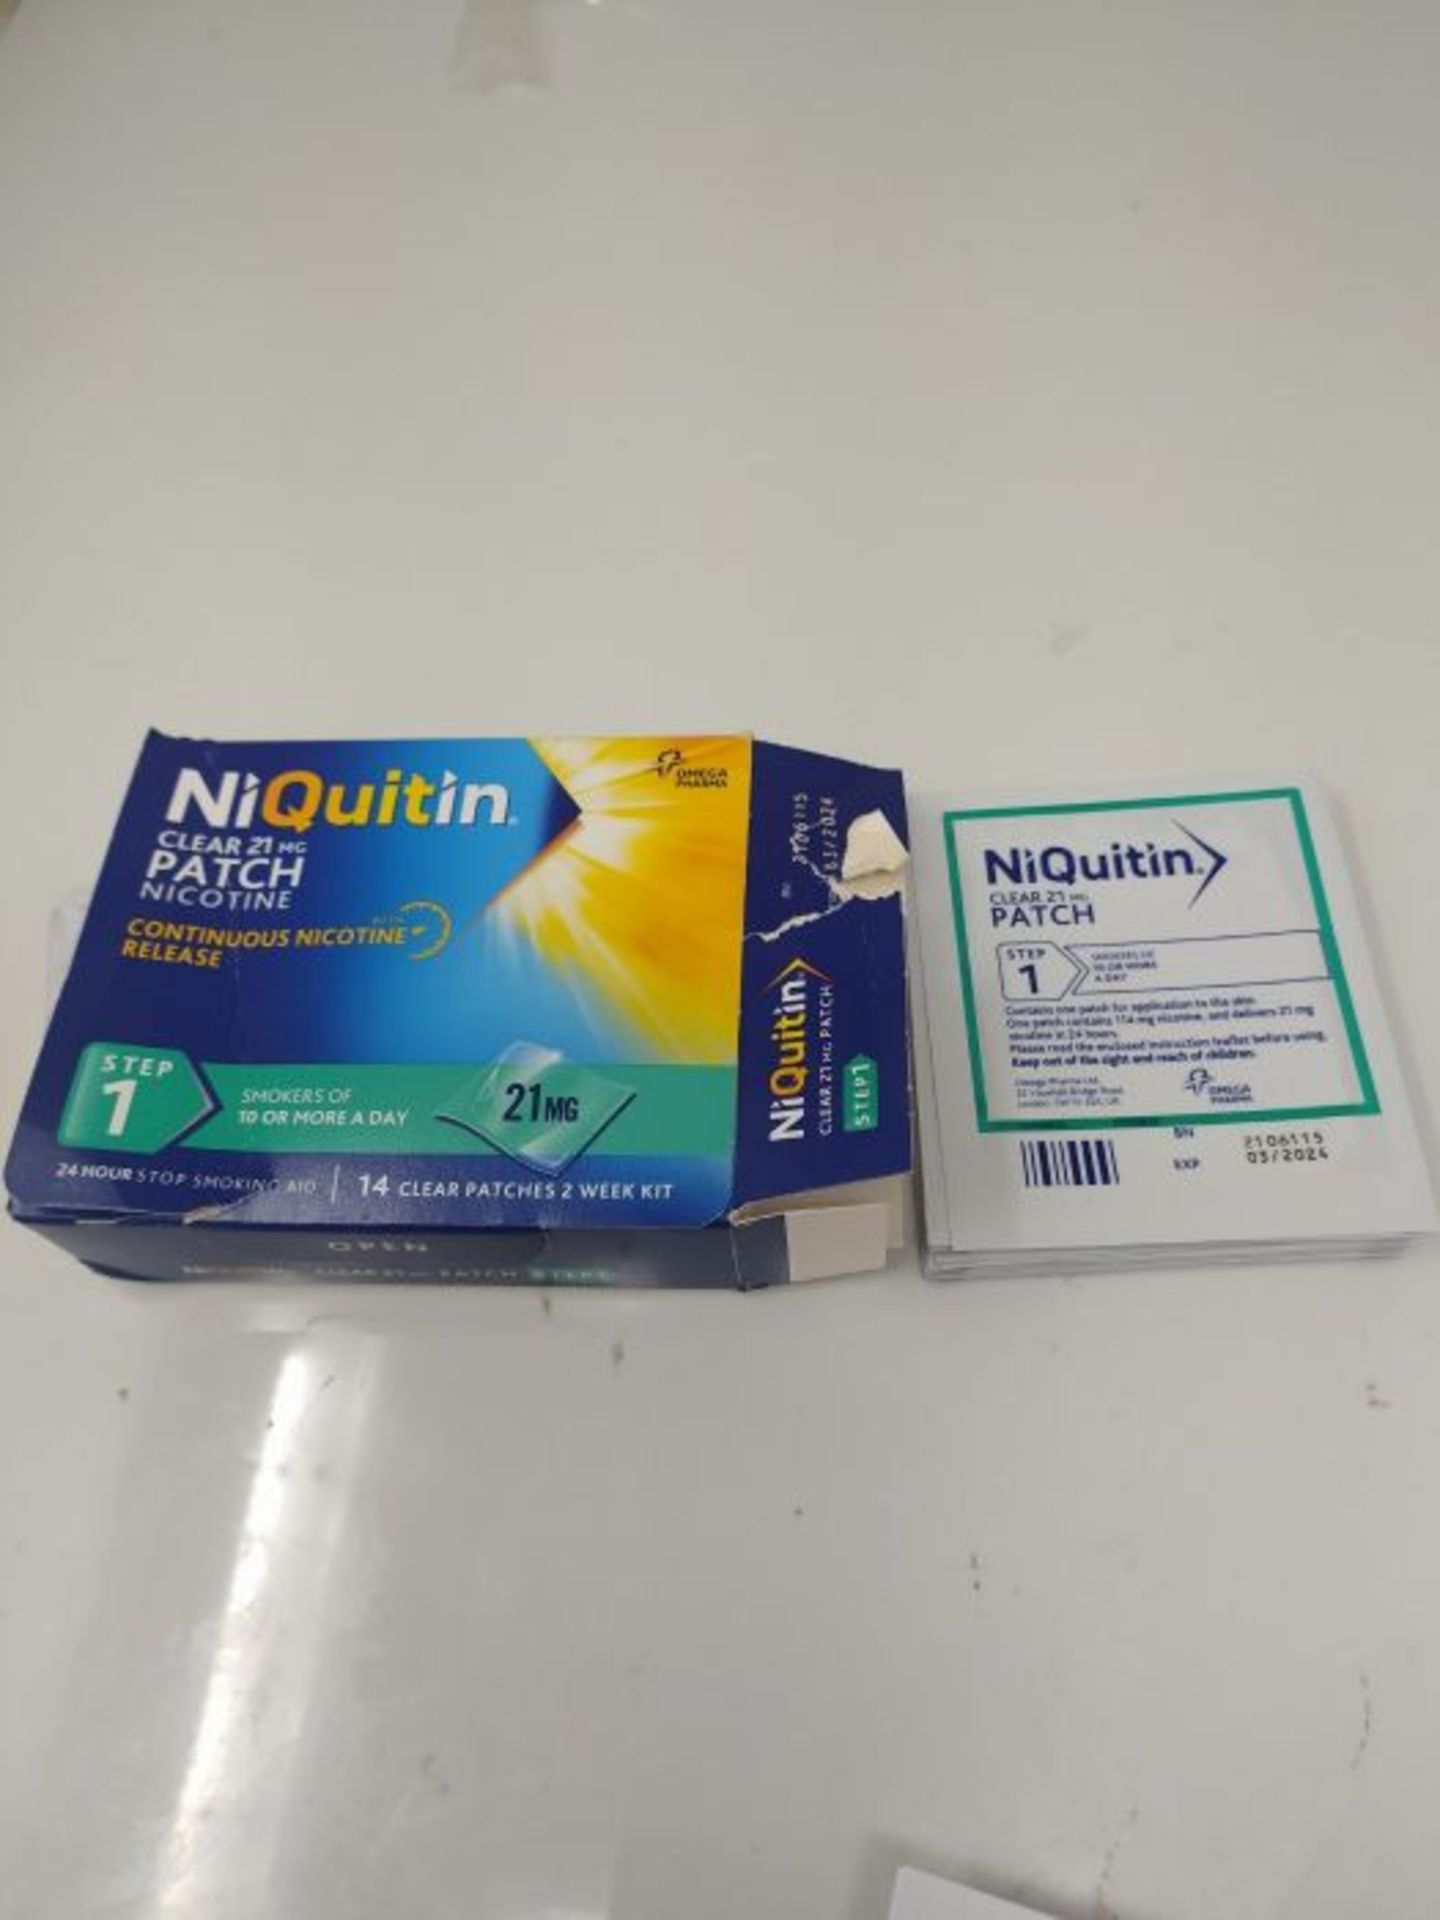 NiQuitin Clear 24 Hour 14 Patches Step 1, 21 mg - 2 Week Kit - Image 2 of 2